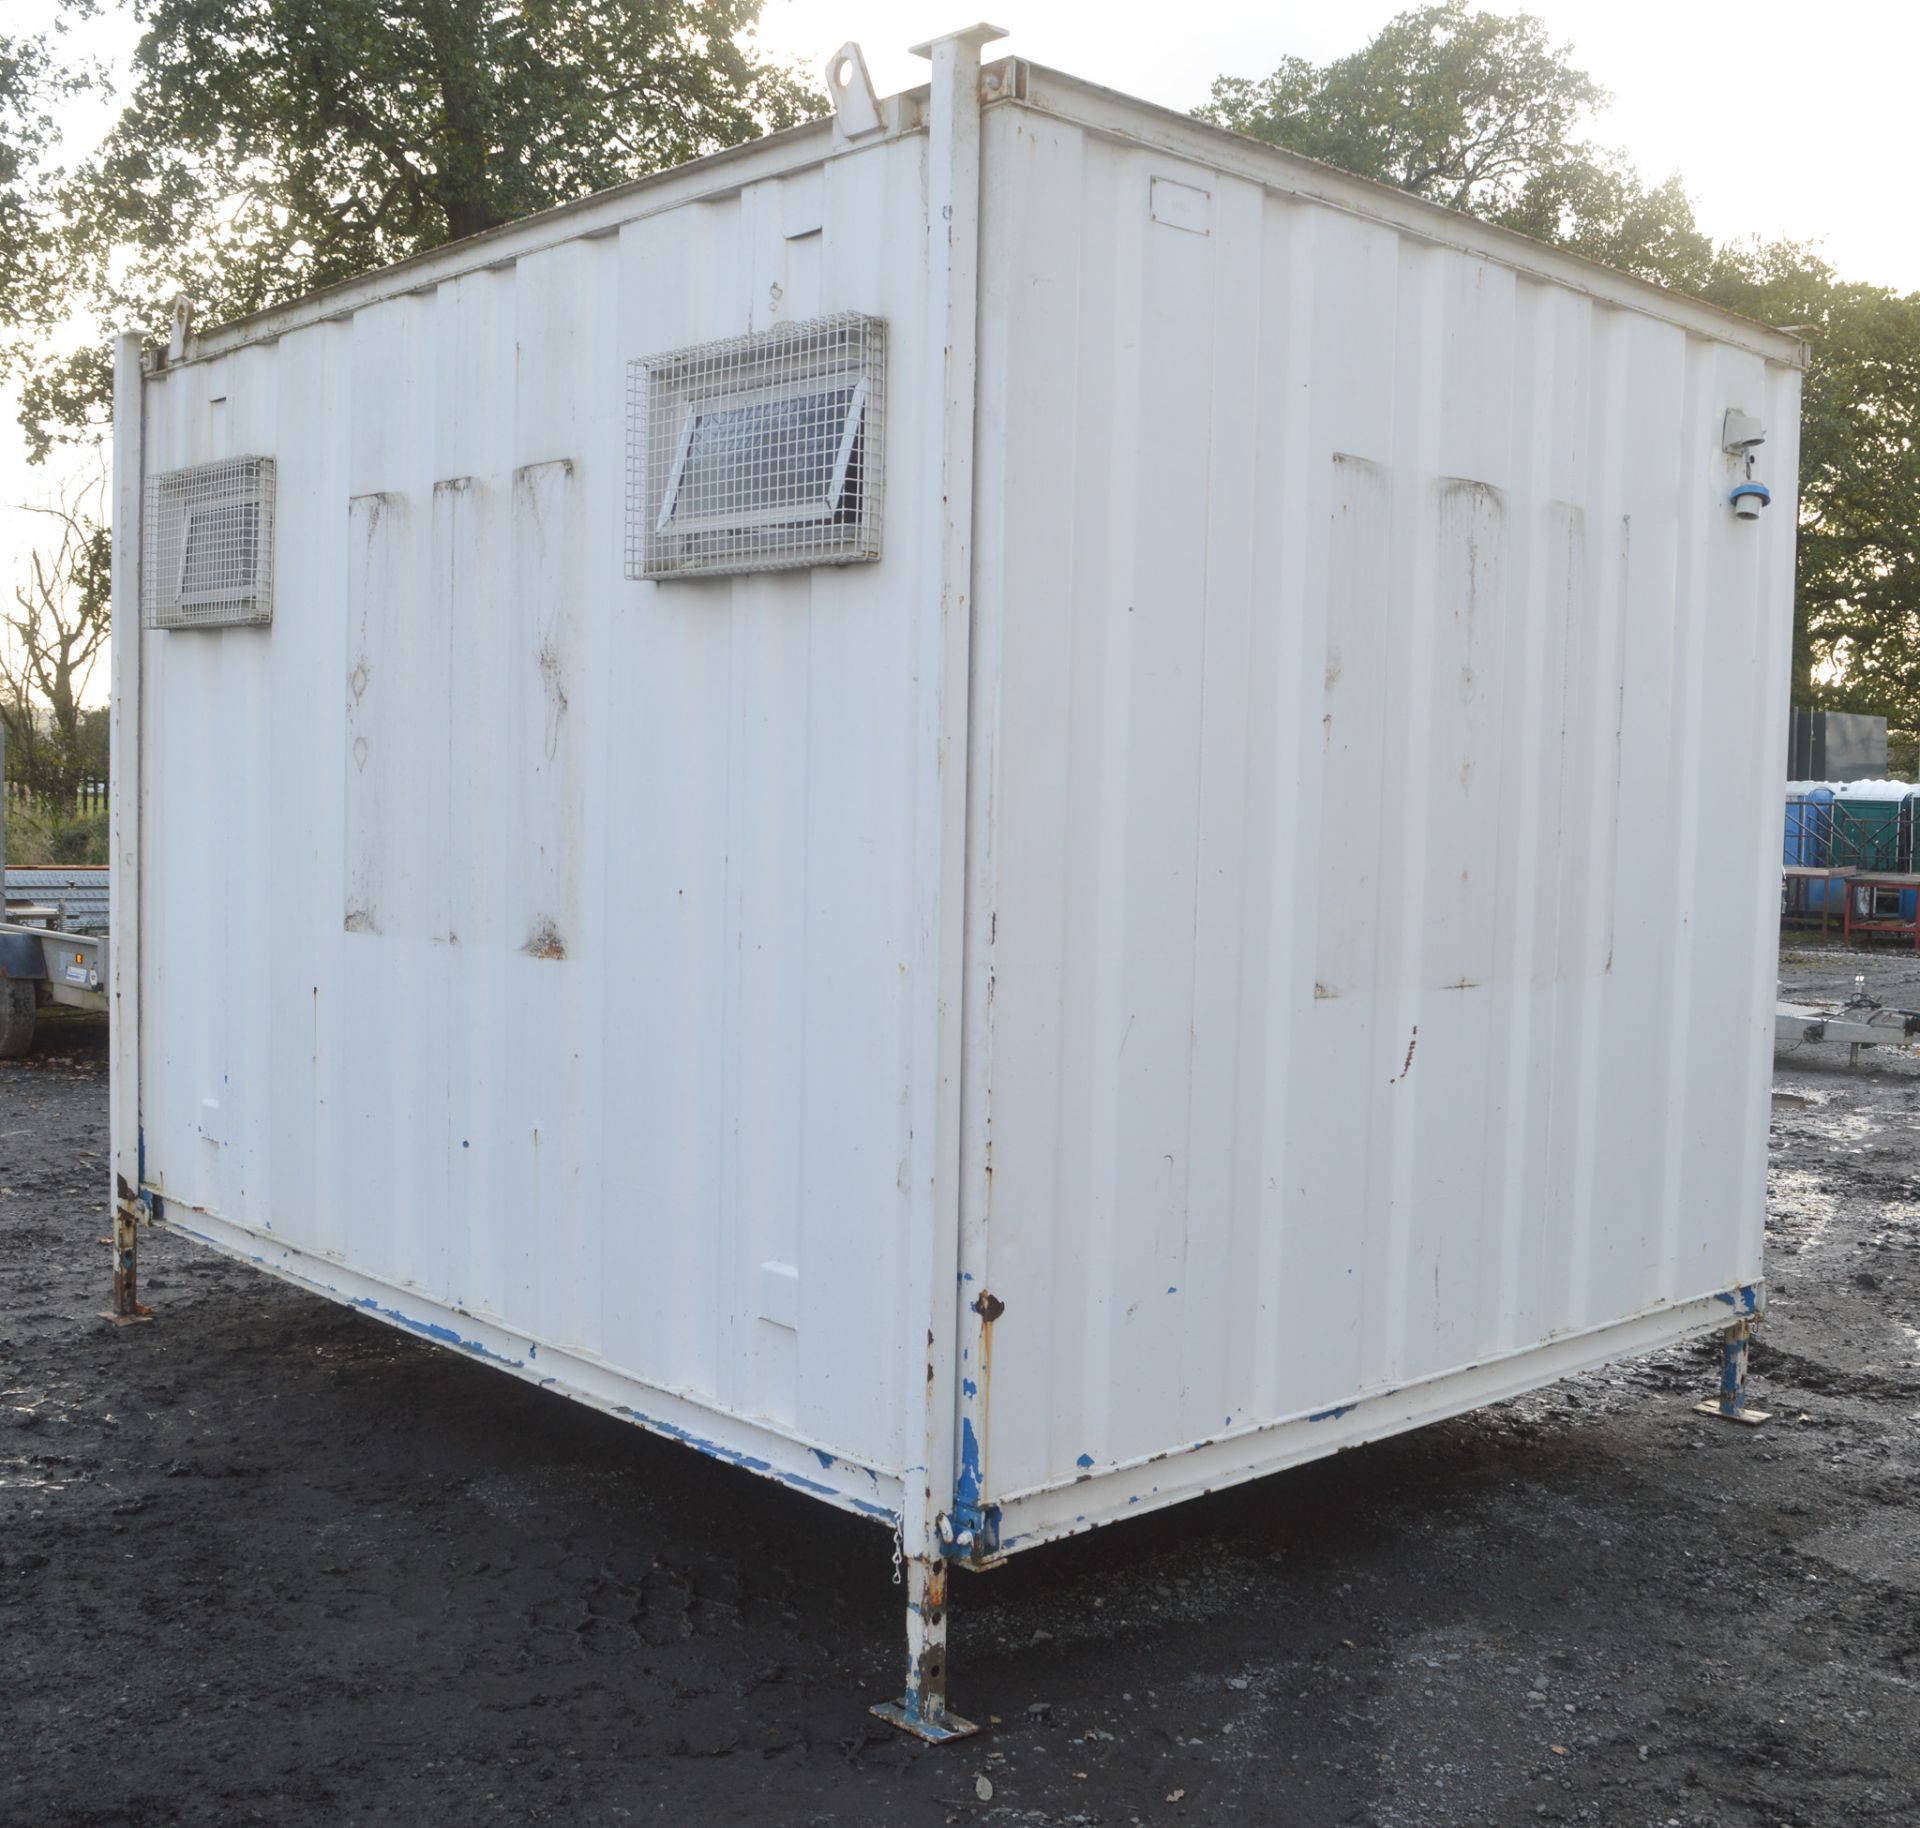 12 ft x 8 ft jack leg steel anti vandal toilet block  Comprising 2 cubicle toilets, 2 urinals and - Image 2 of 8